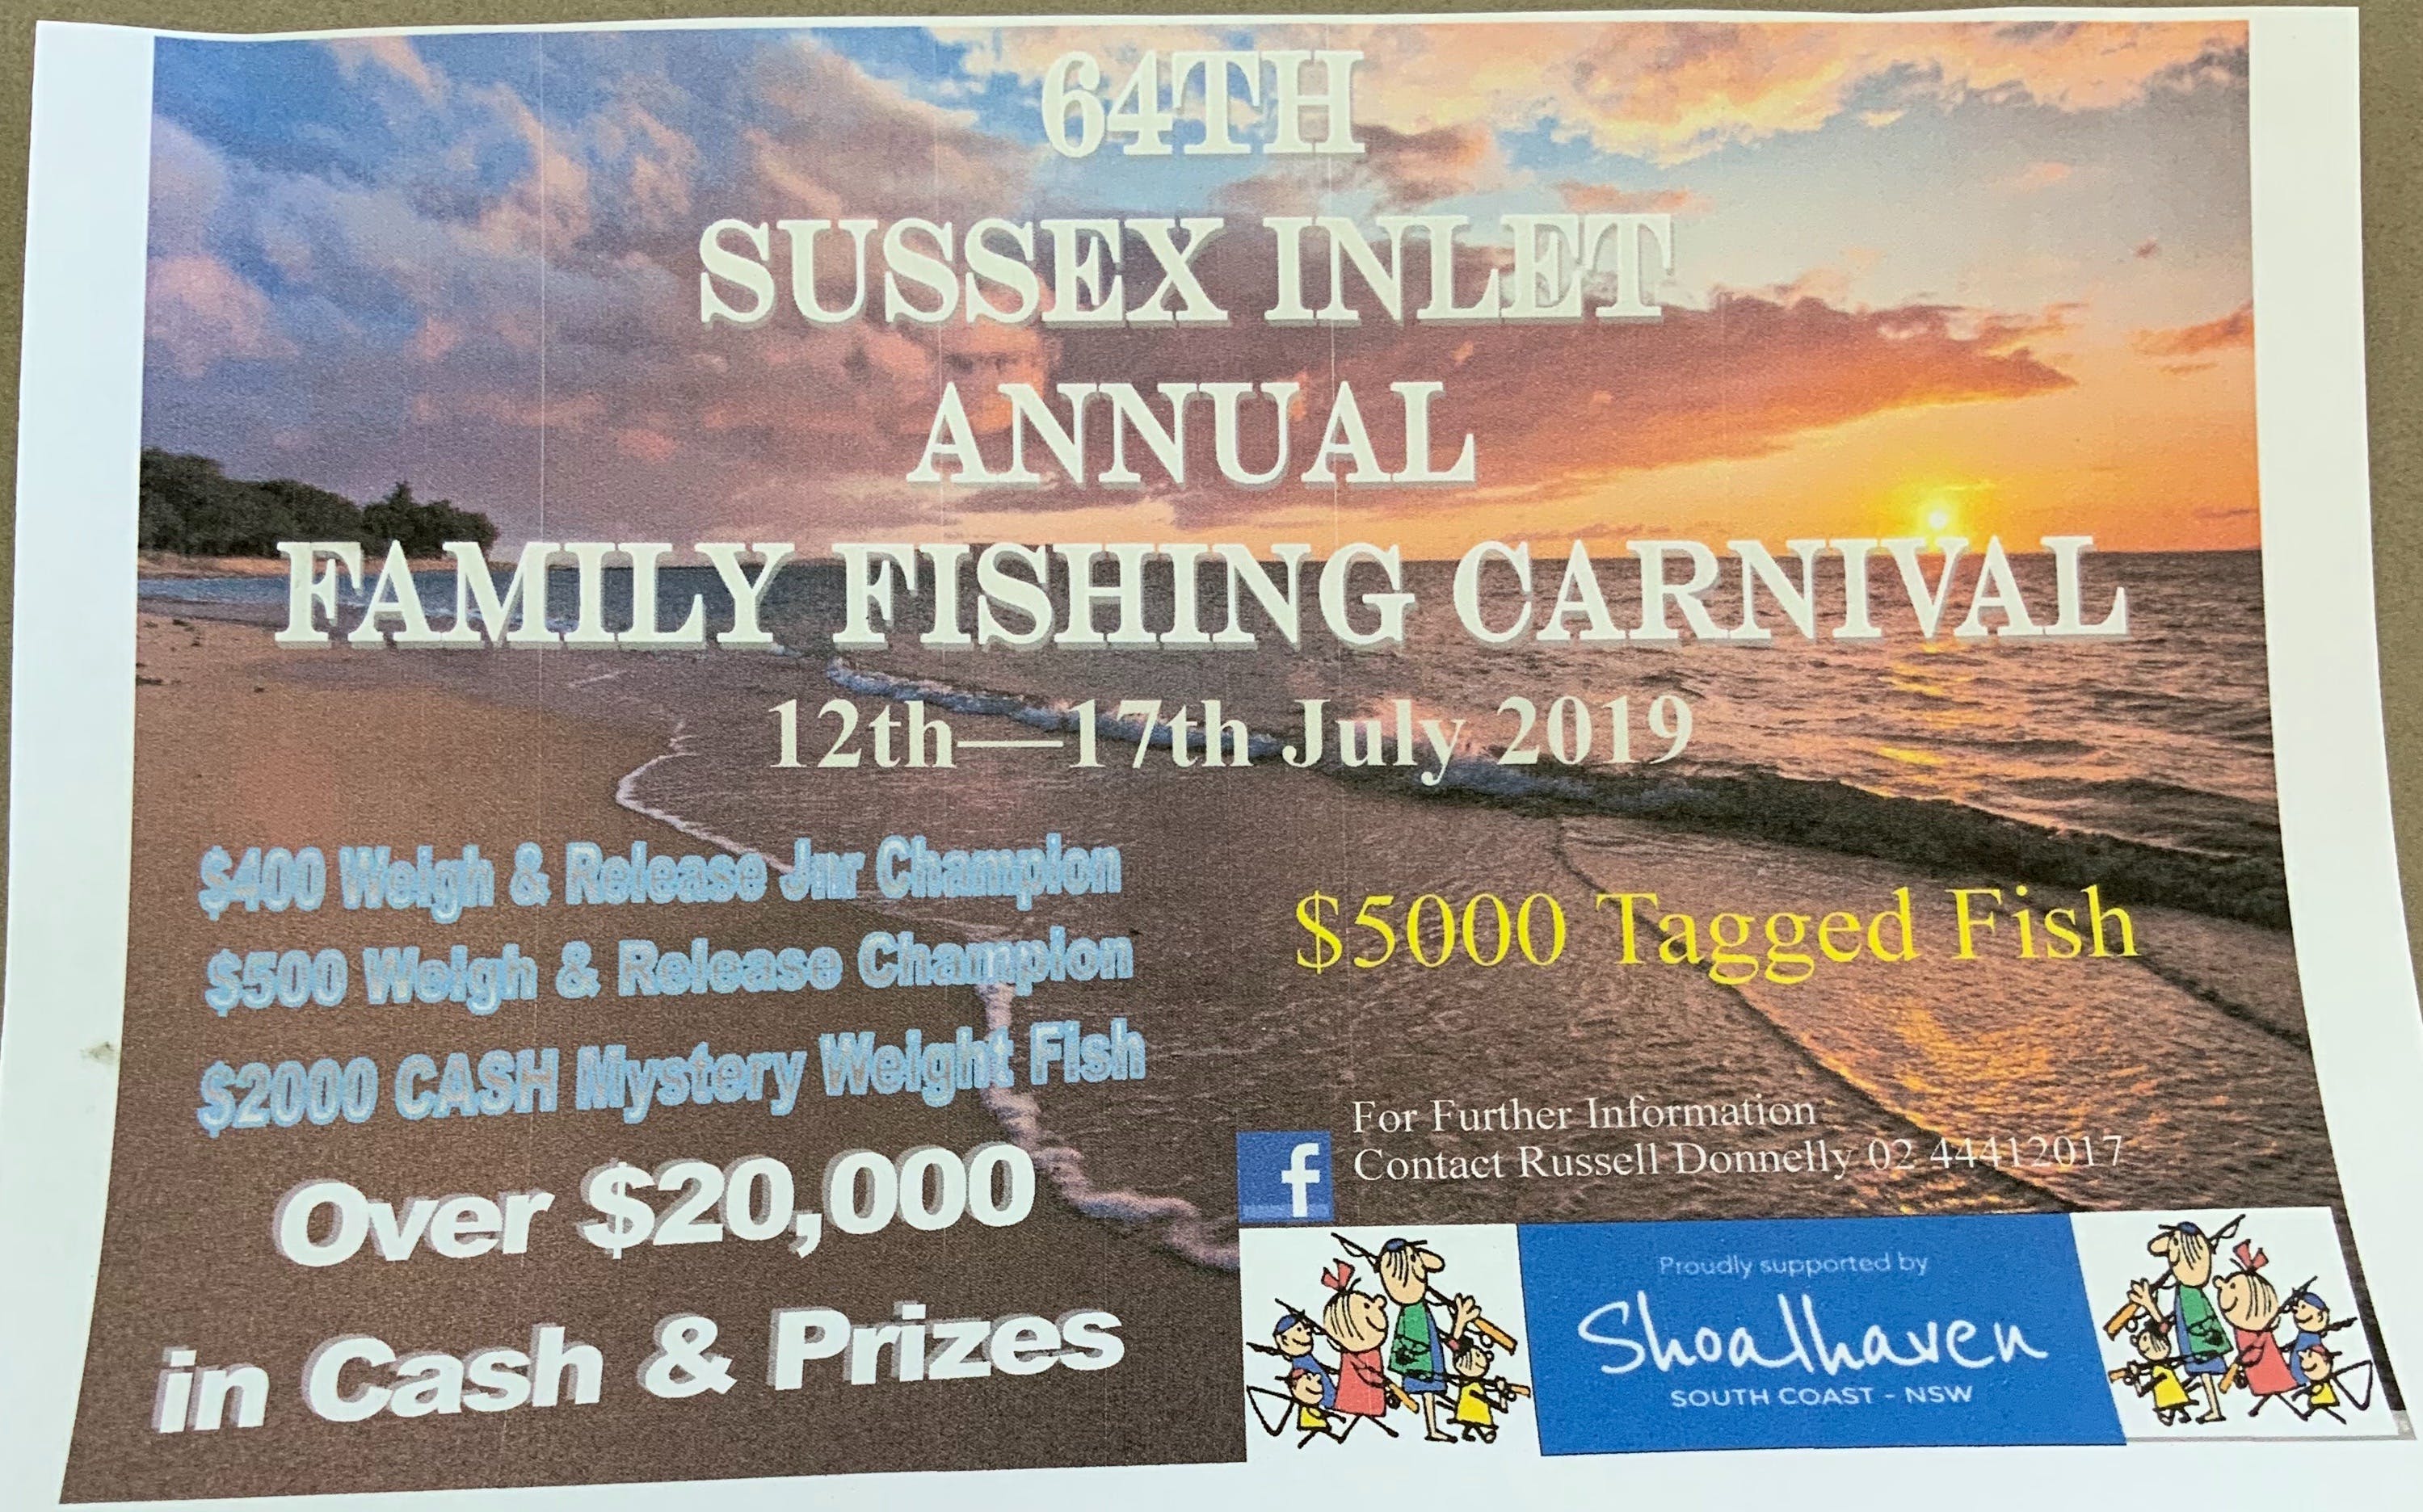 The Sussex Inlet Annual Family Fishing Carnival - C Tourism